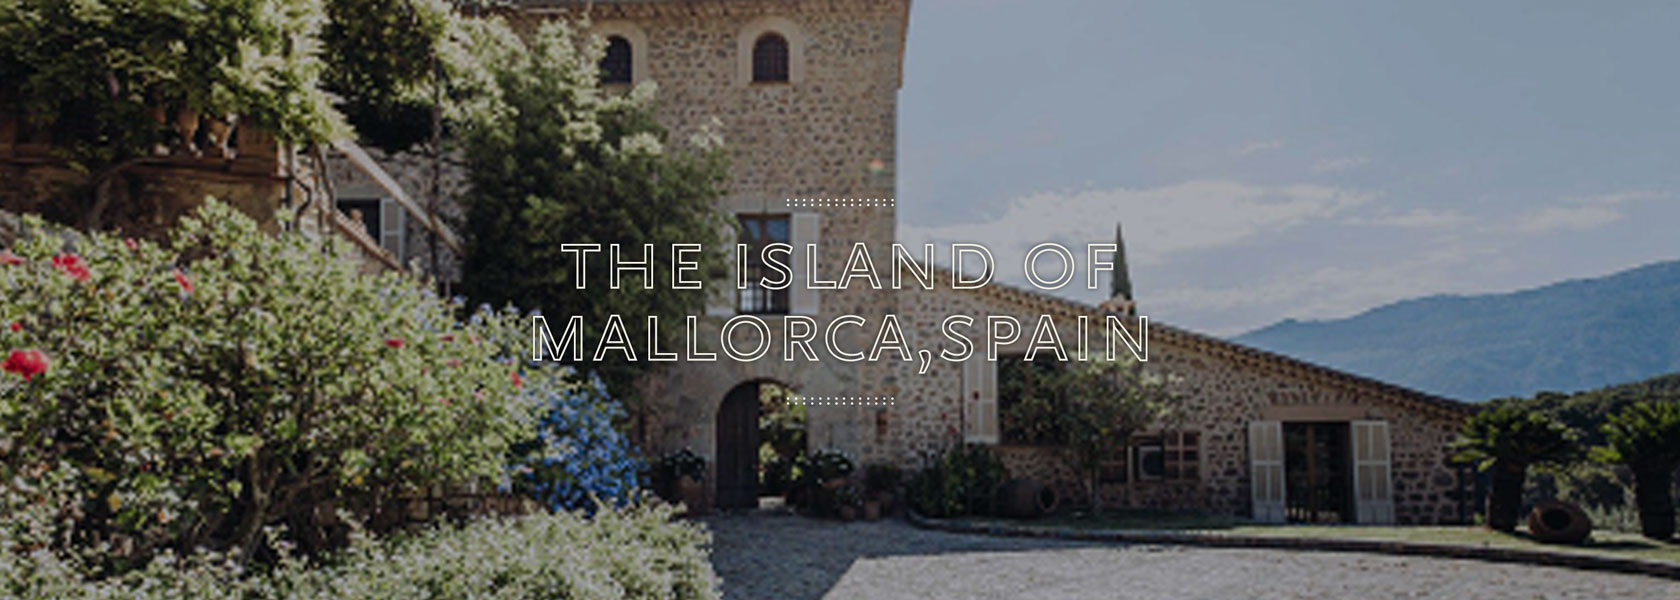 Culinary Tour to the Island of Mallorca, Spain